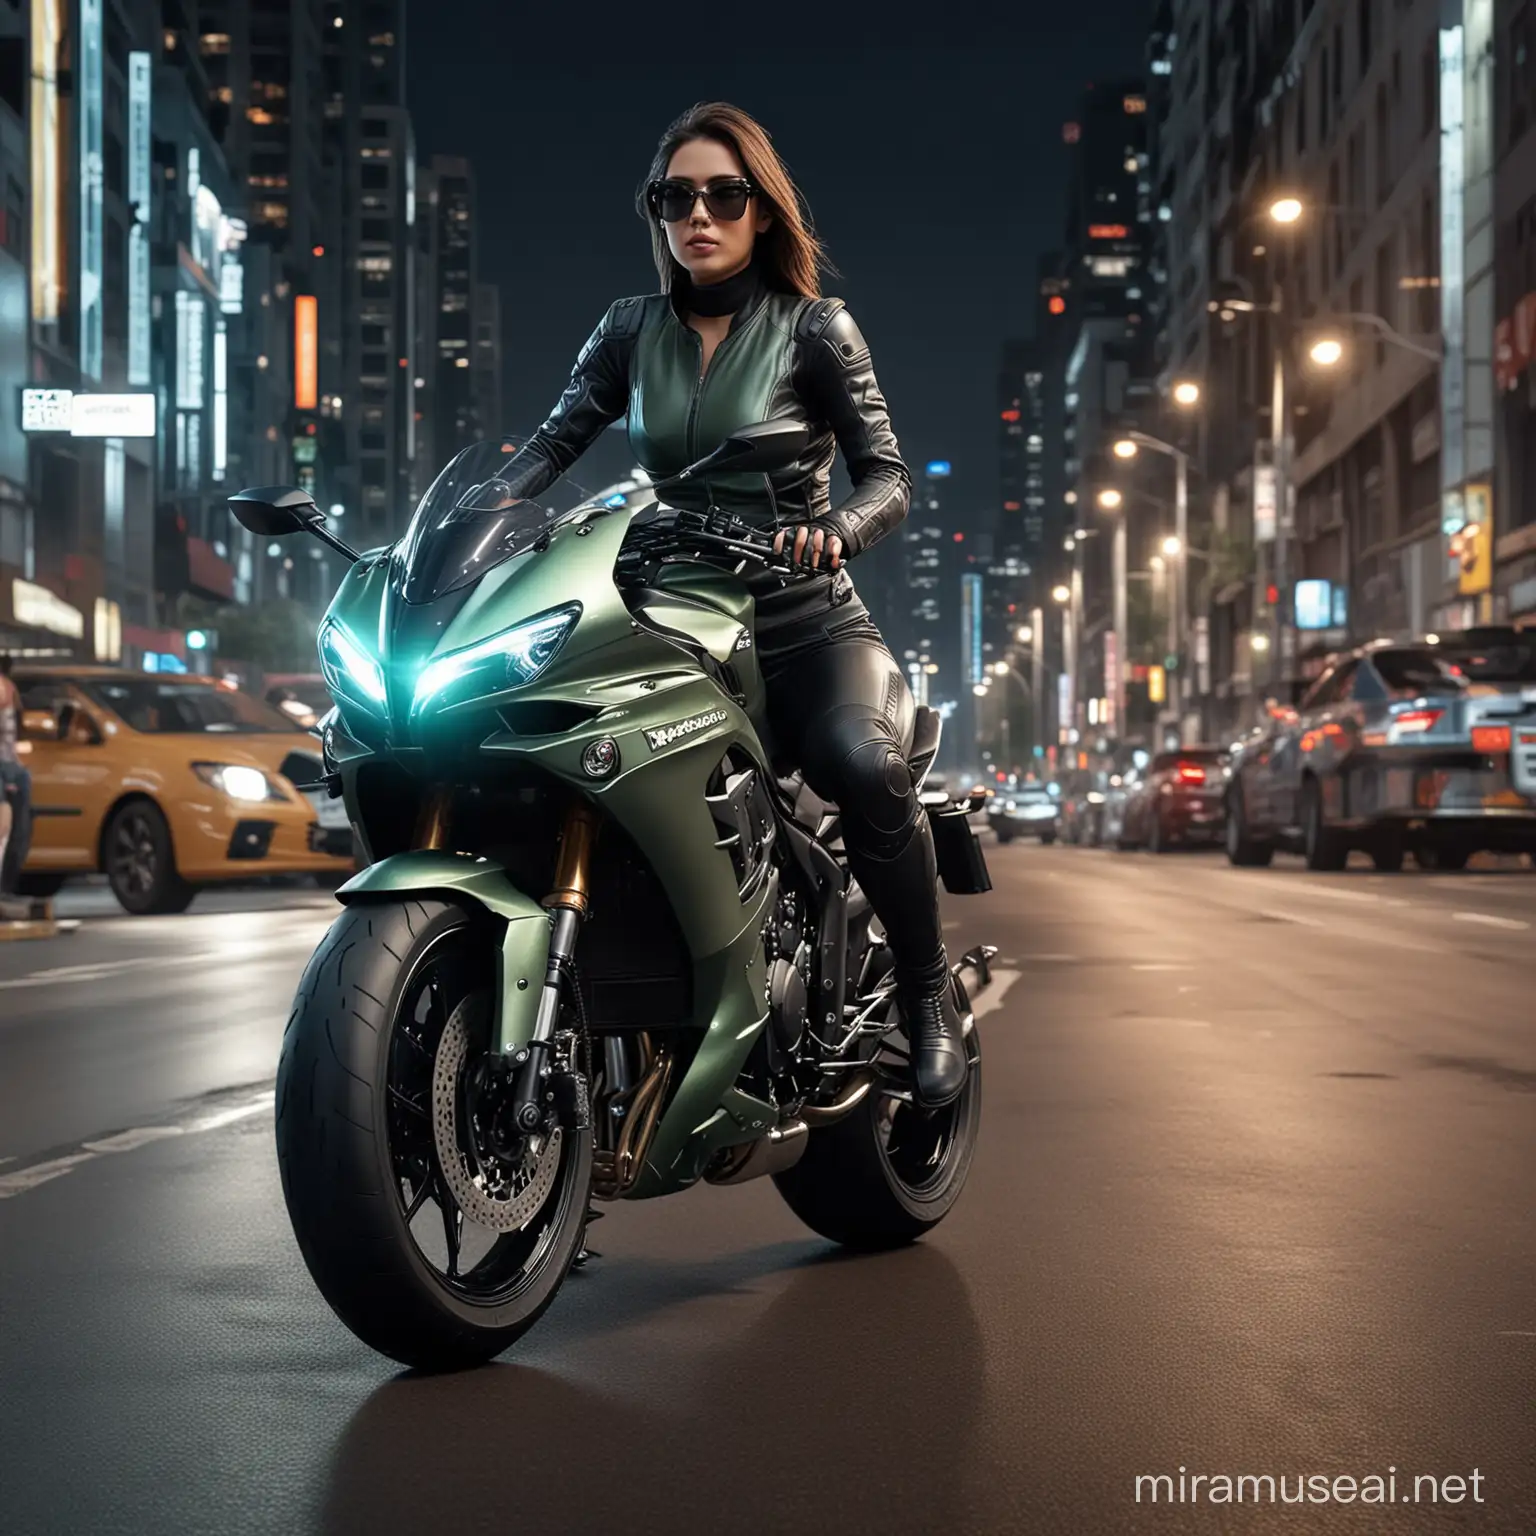 a length image from side photography realistic,full body Beautiful woman as an futuristic rider beauty face,sunglasses,she on riding futuristic kawasaki motorsports H2R metalic color modifications on the way high speed night city street